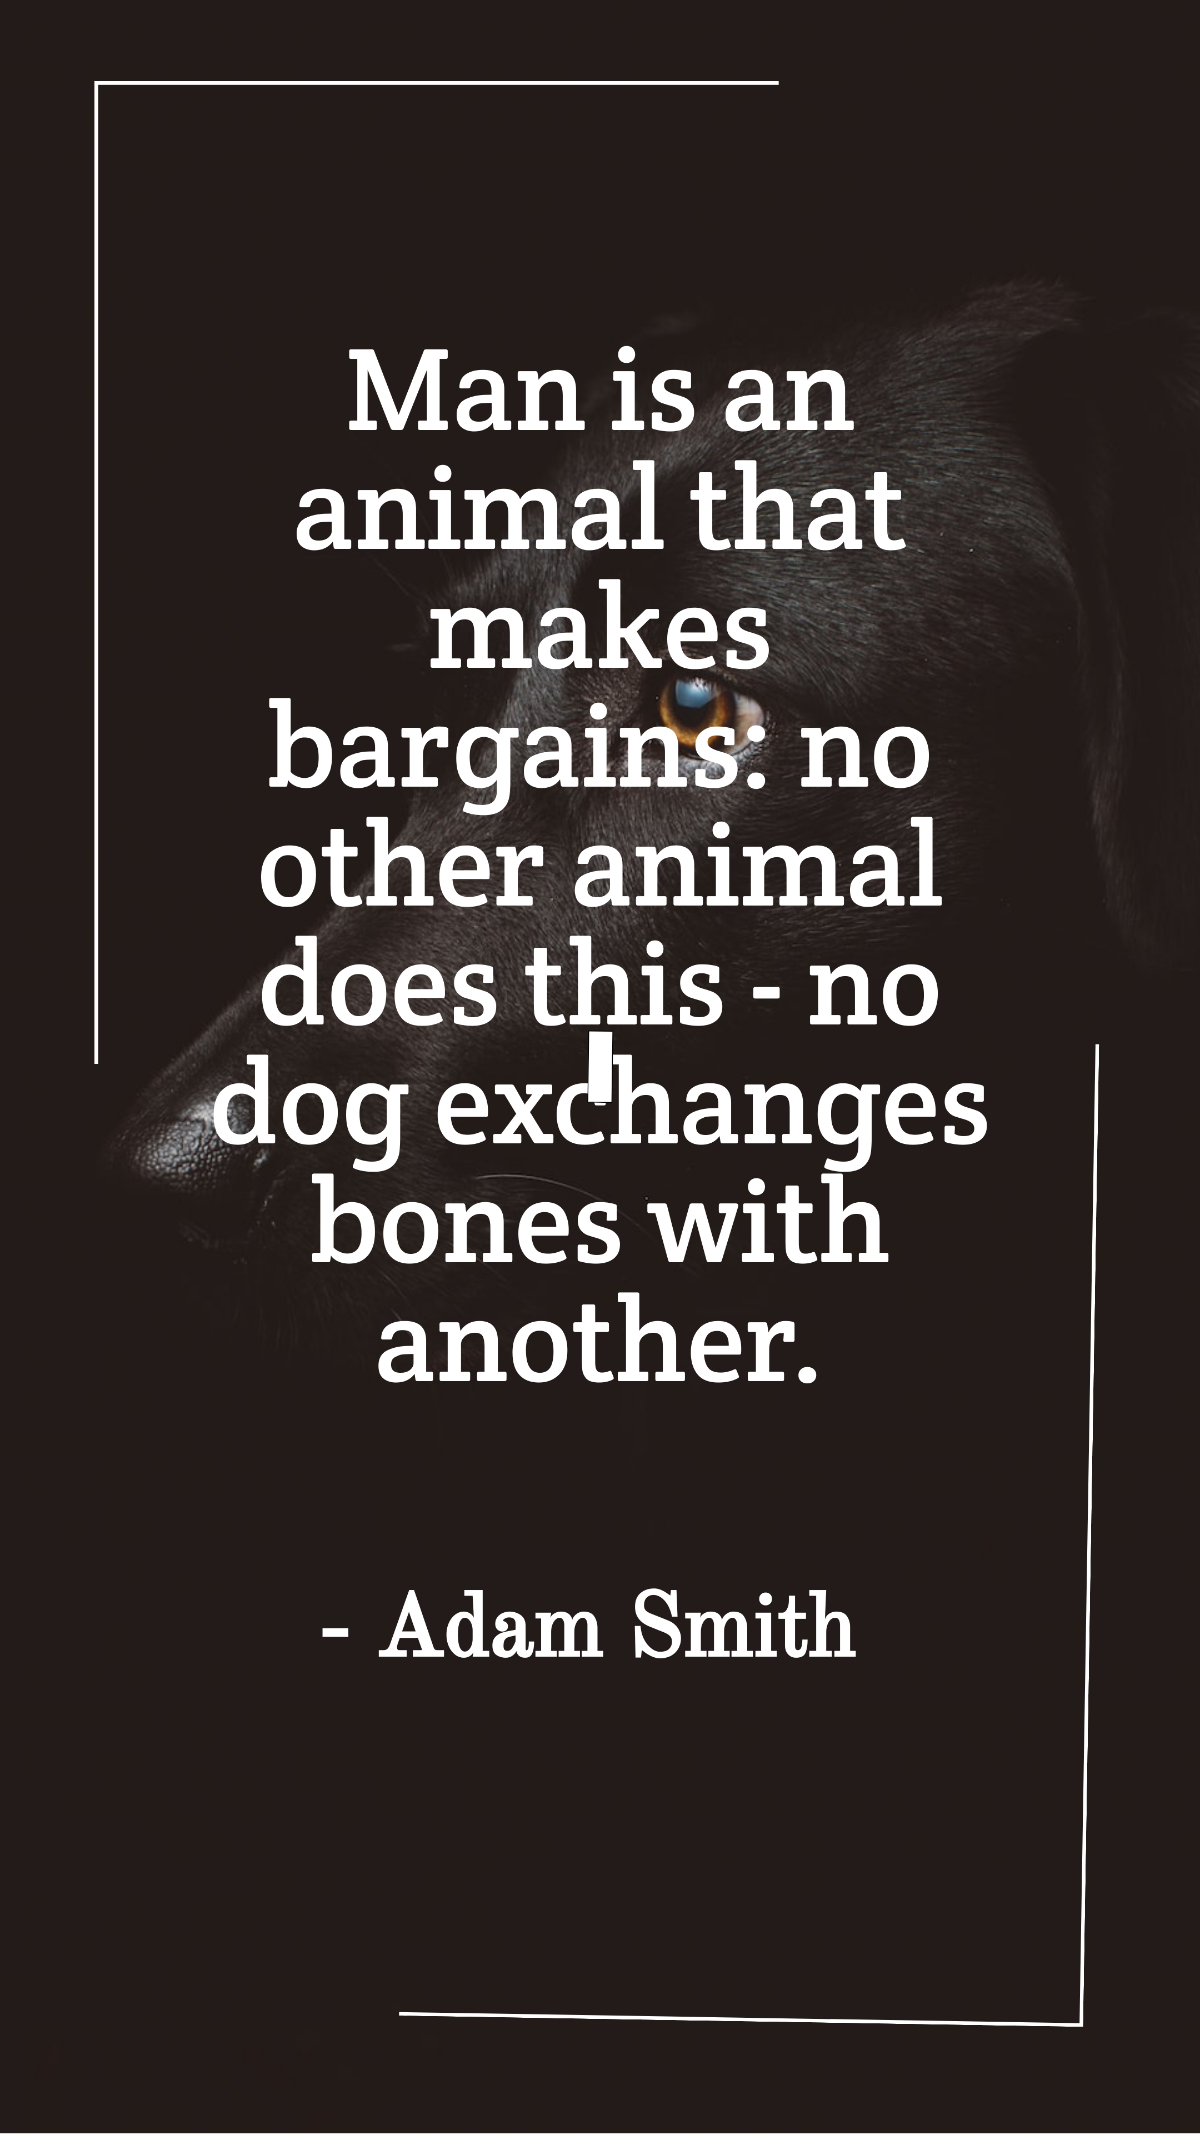 Free Adam Smith - Man is an animal that makes bargains: no other animal does this - no dog exchanges bones with another. Template